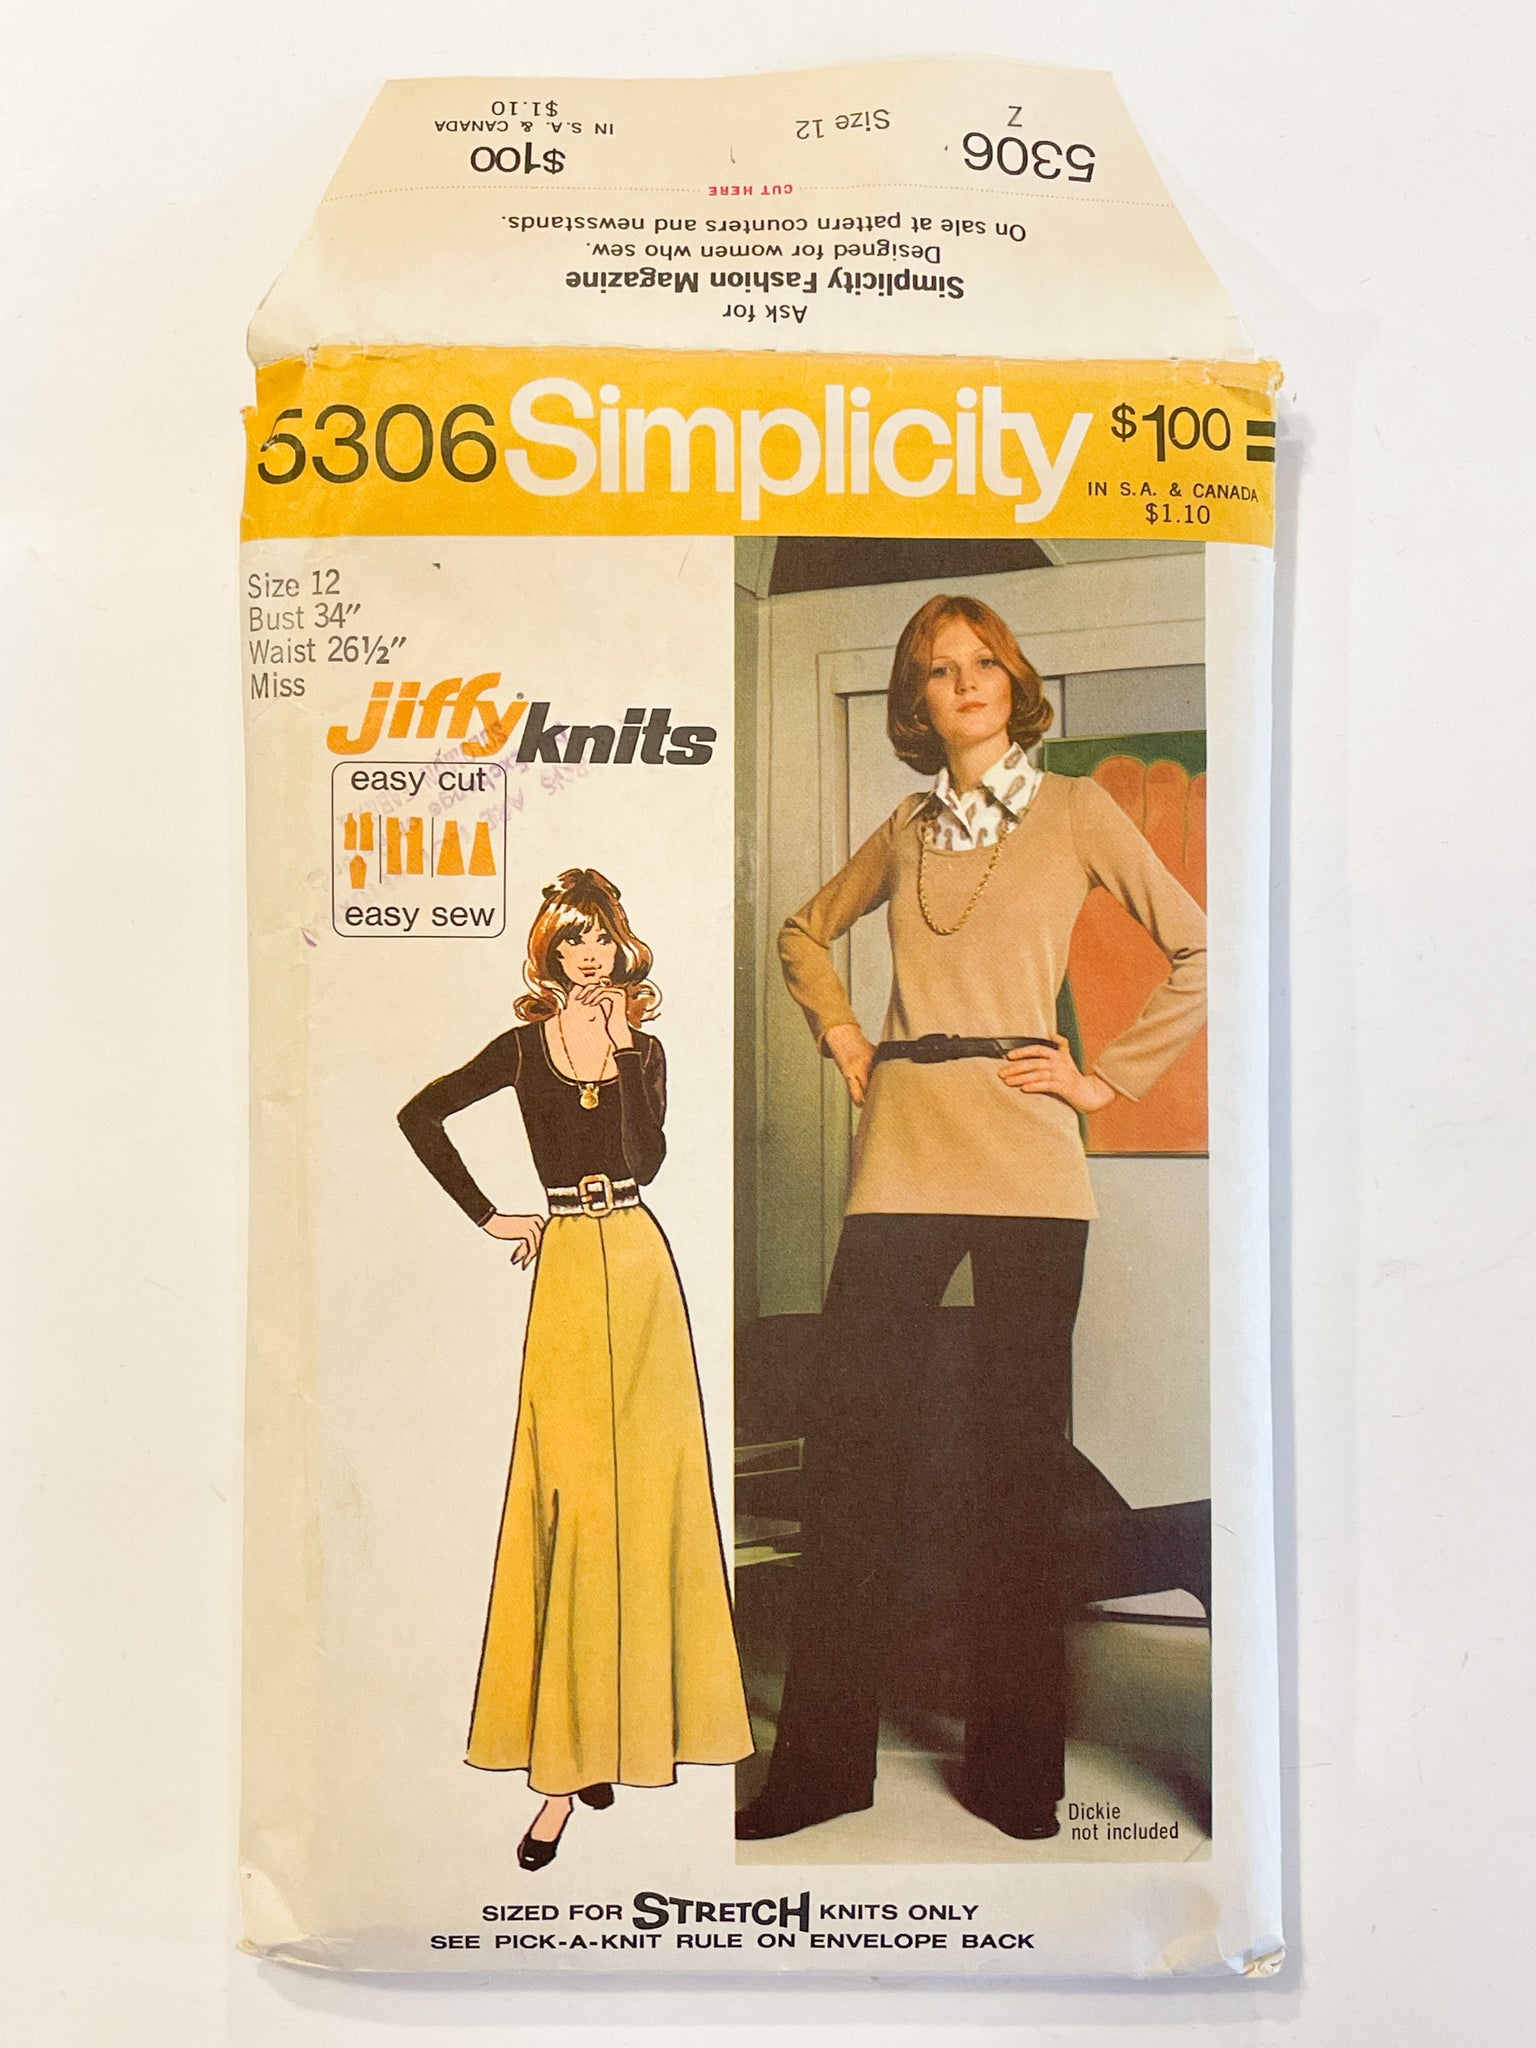 1972 Simplicity 5306 Pattern - Women's  Knit Top, Skirt and Pants